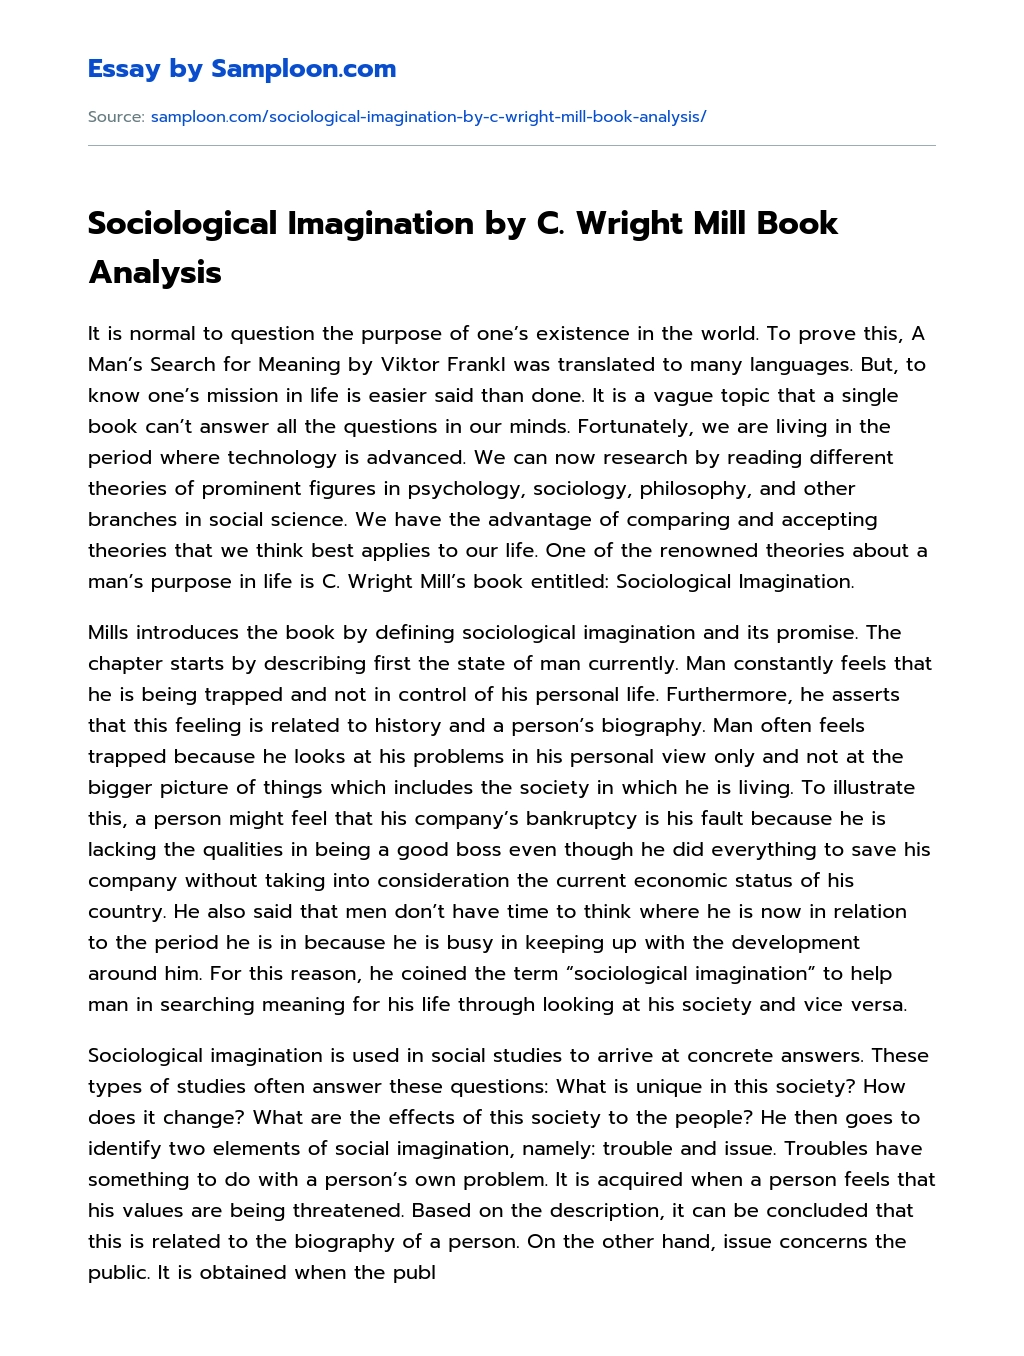 Sociological Imagination by C. Wright Mill Book Analysis essay